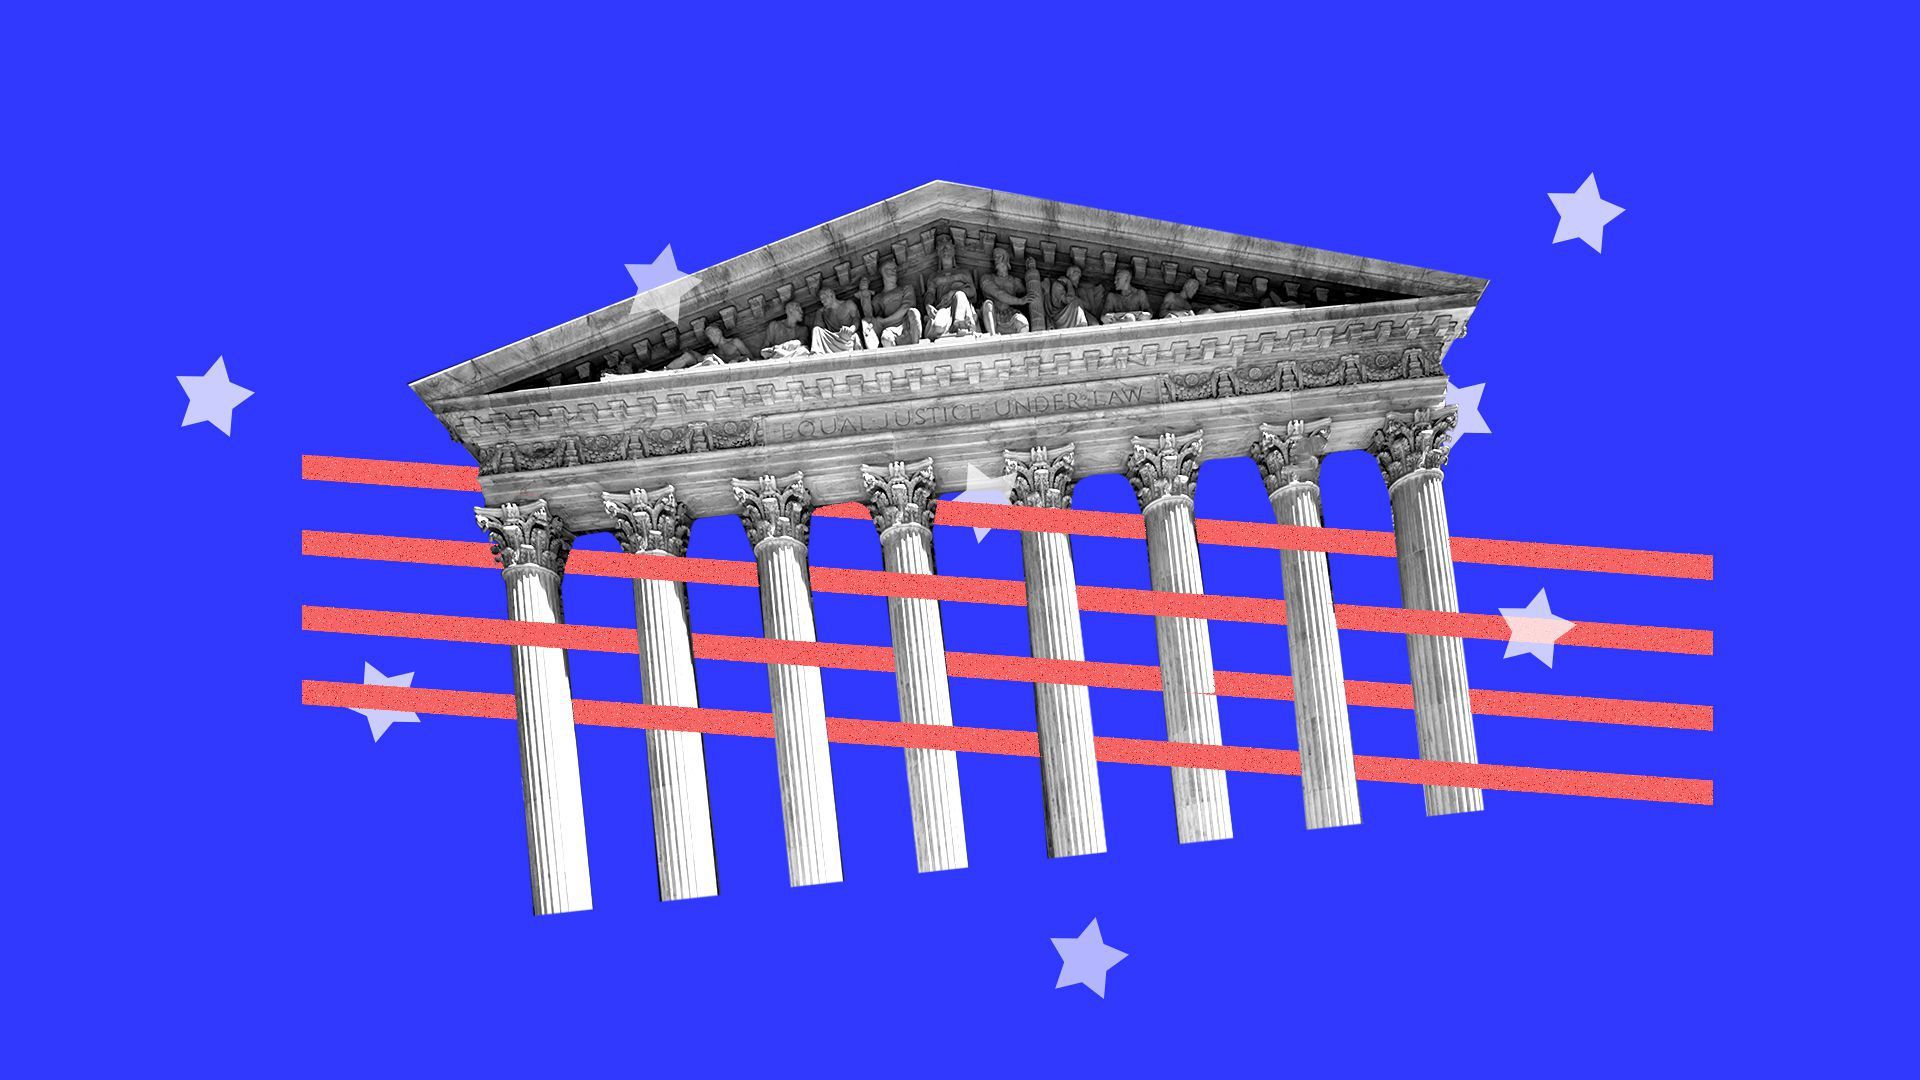 An image of the Supreme Court